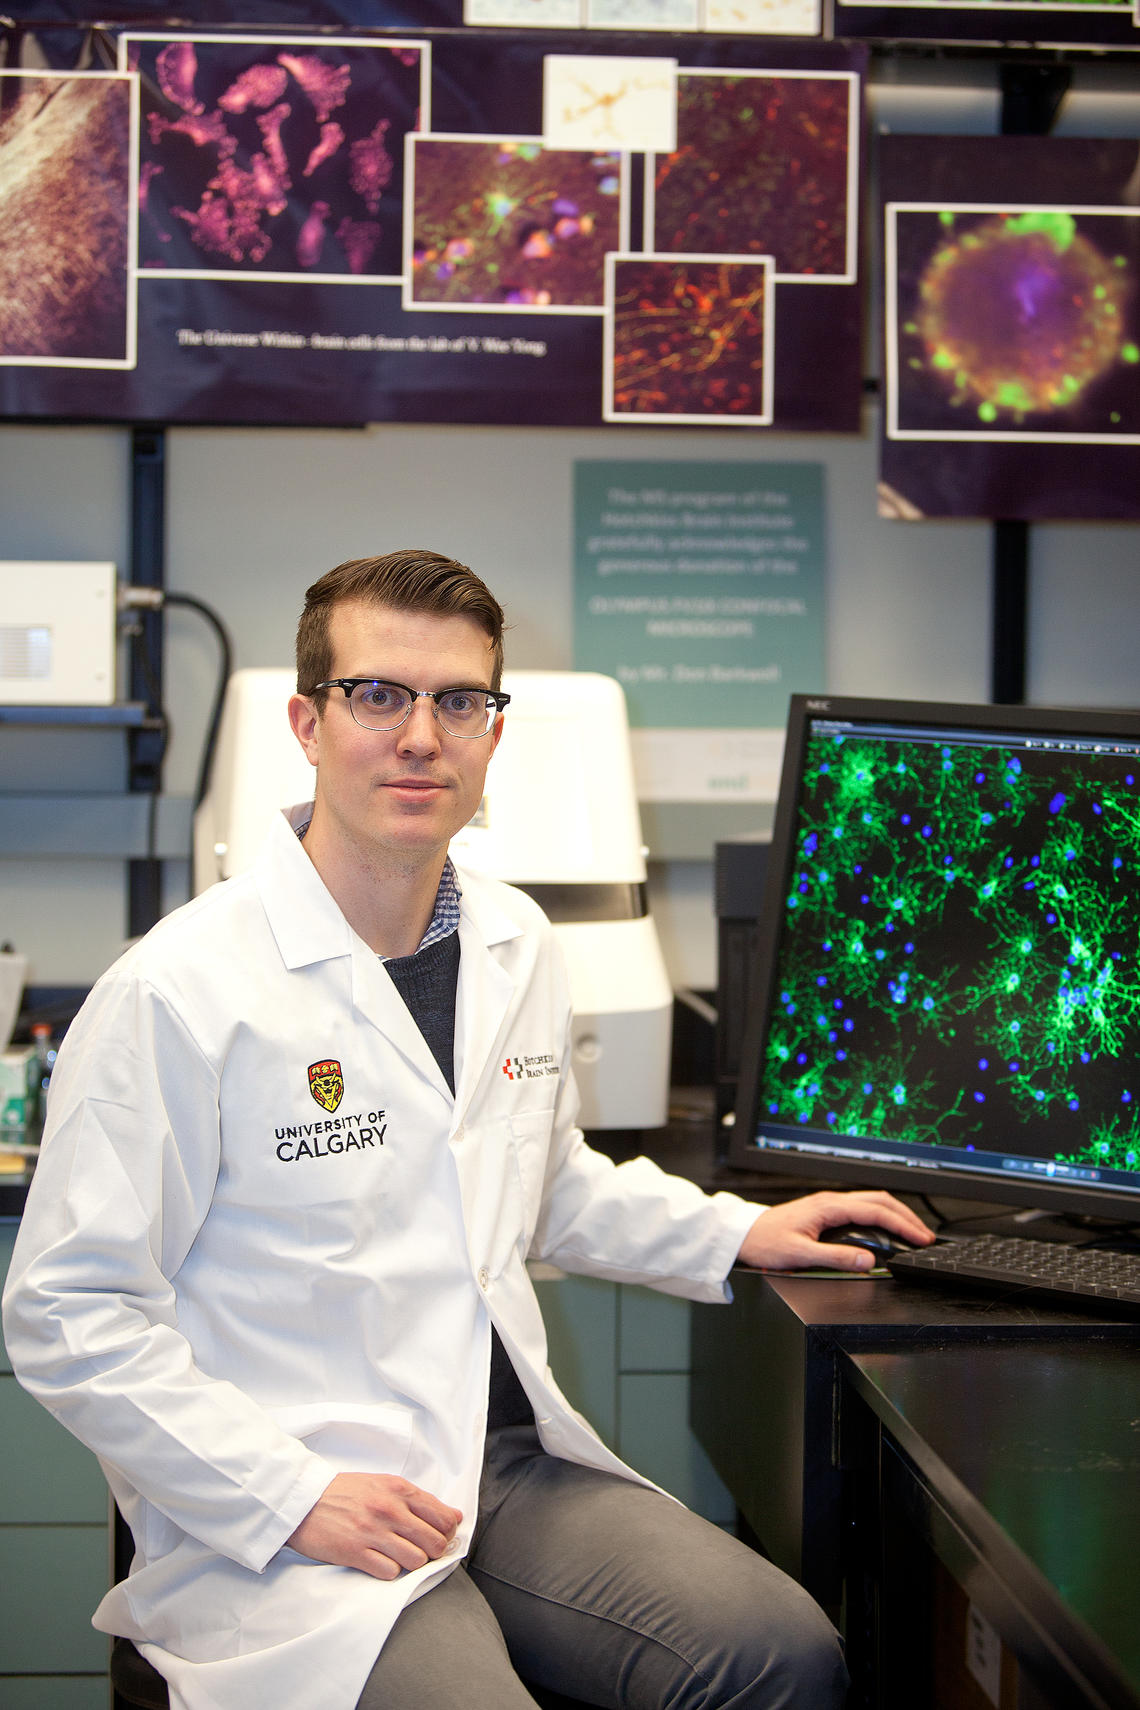 Michael Keough is a joint MD-PhD student in the Leaders in Medicine program at the Cumming School of Medicine and HBI trainee. Searching for better therapies for patients with multiple sclerosis, Keough collaborated with the university's chemistry department, which created a chemical compound that he could test, to investigate the regeneration of myelin.